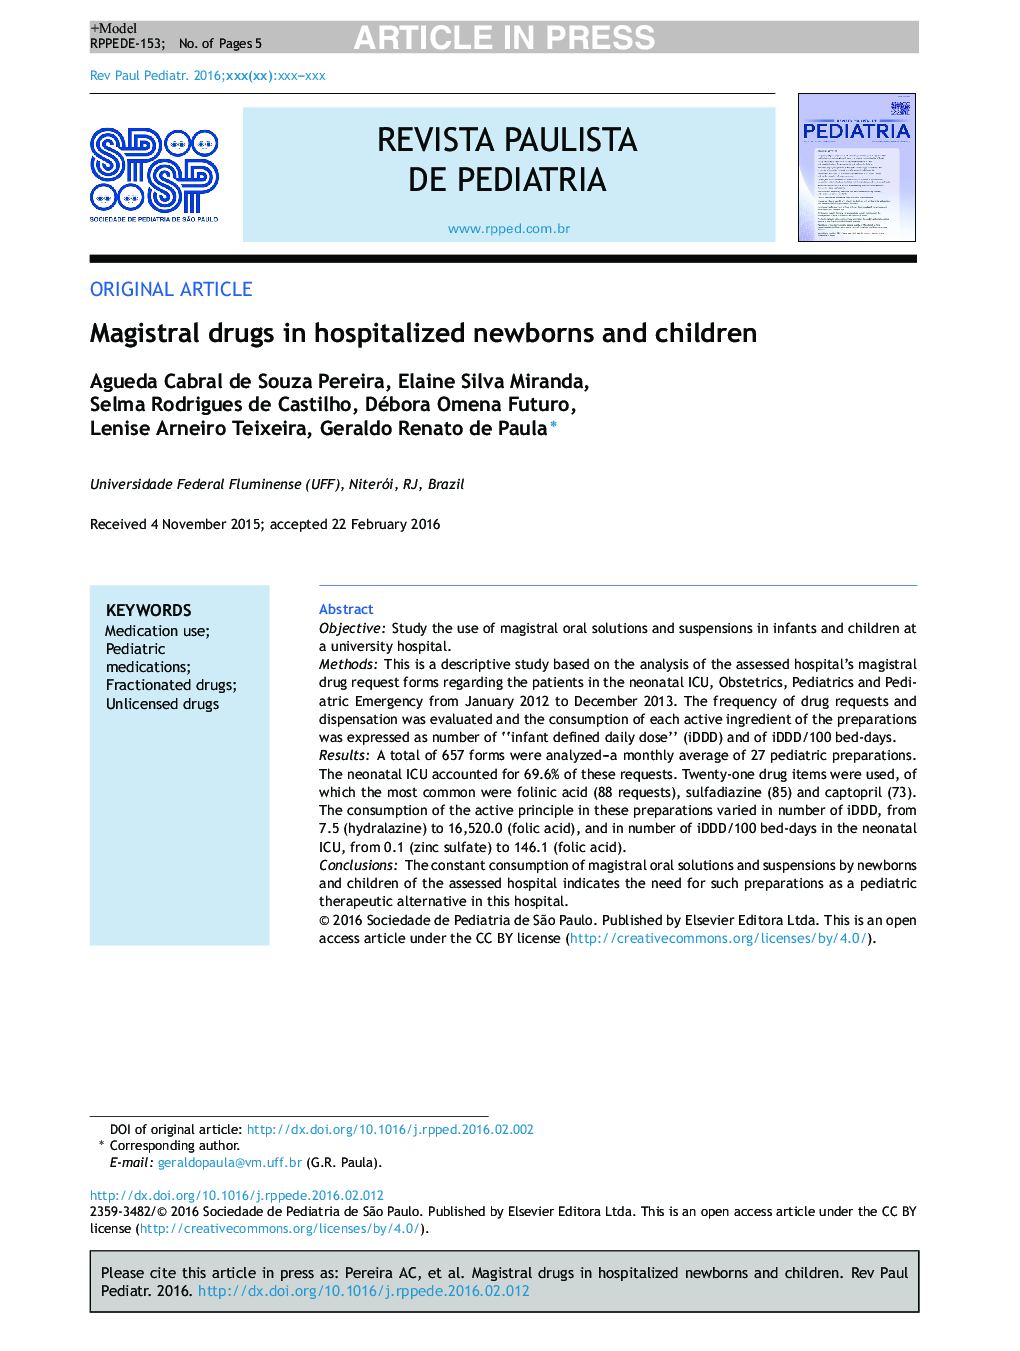 Magistral drugs in hospitalized newborns and children